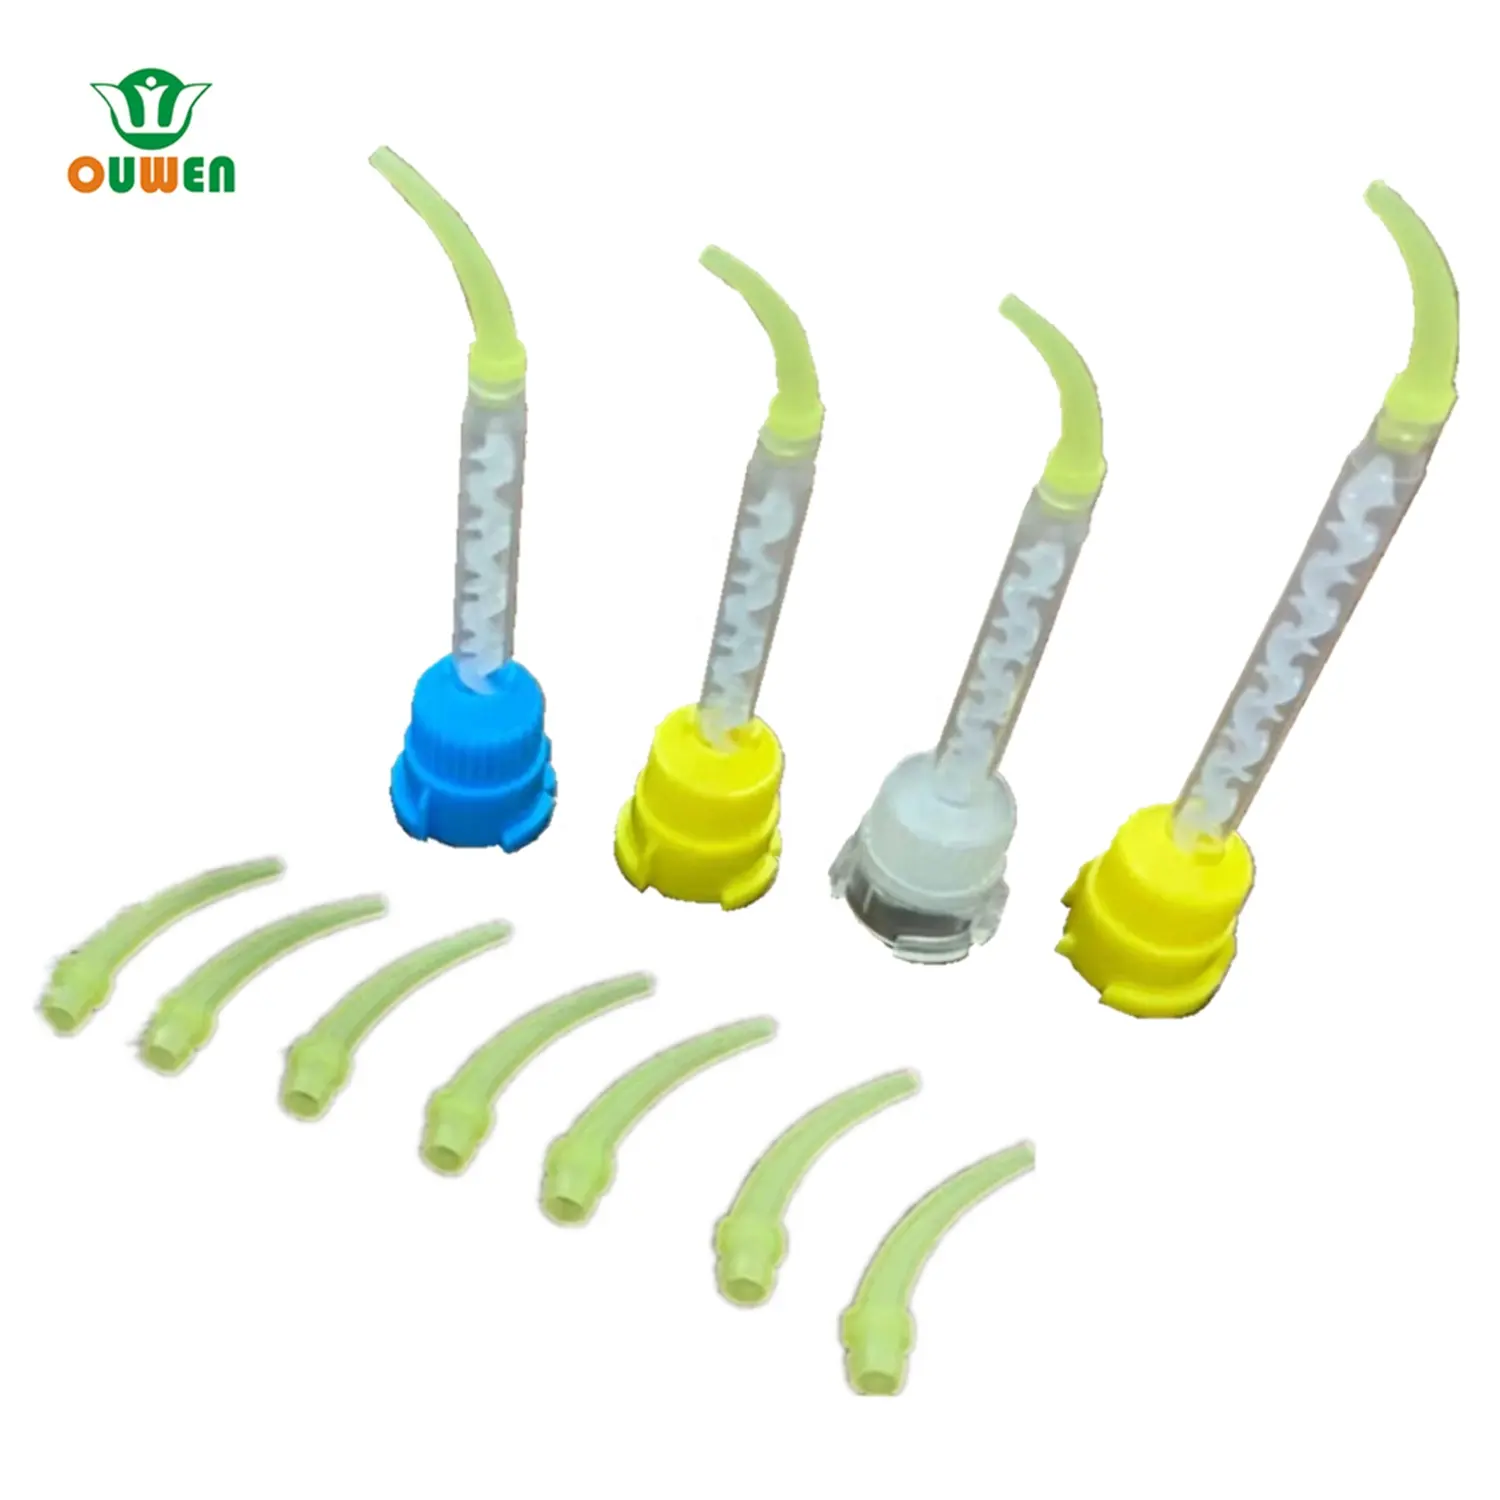 Ouwen Promotion Factory High Performance1: 1/10: 1ab Glue Mixer Great Promotion Dental Mixing Tip